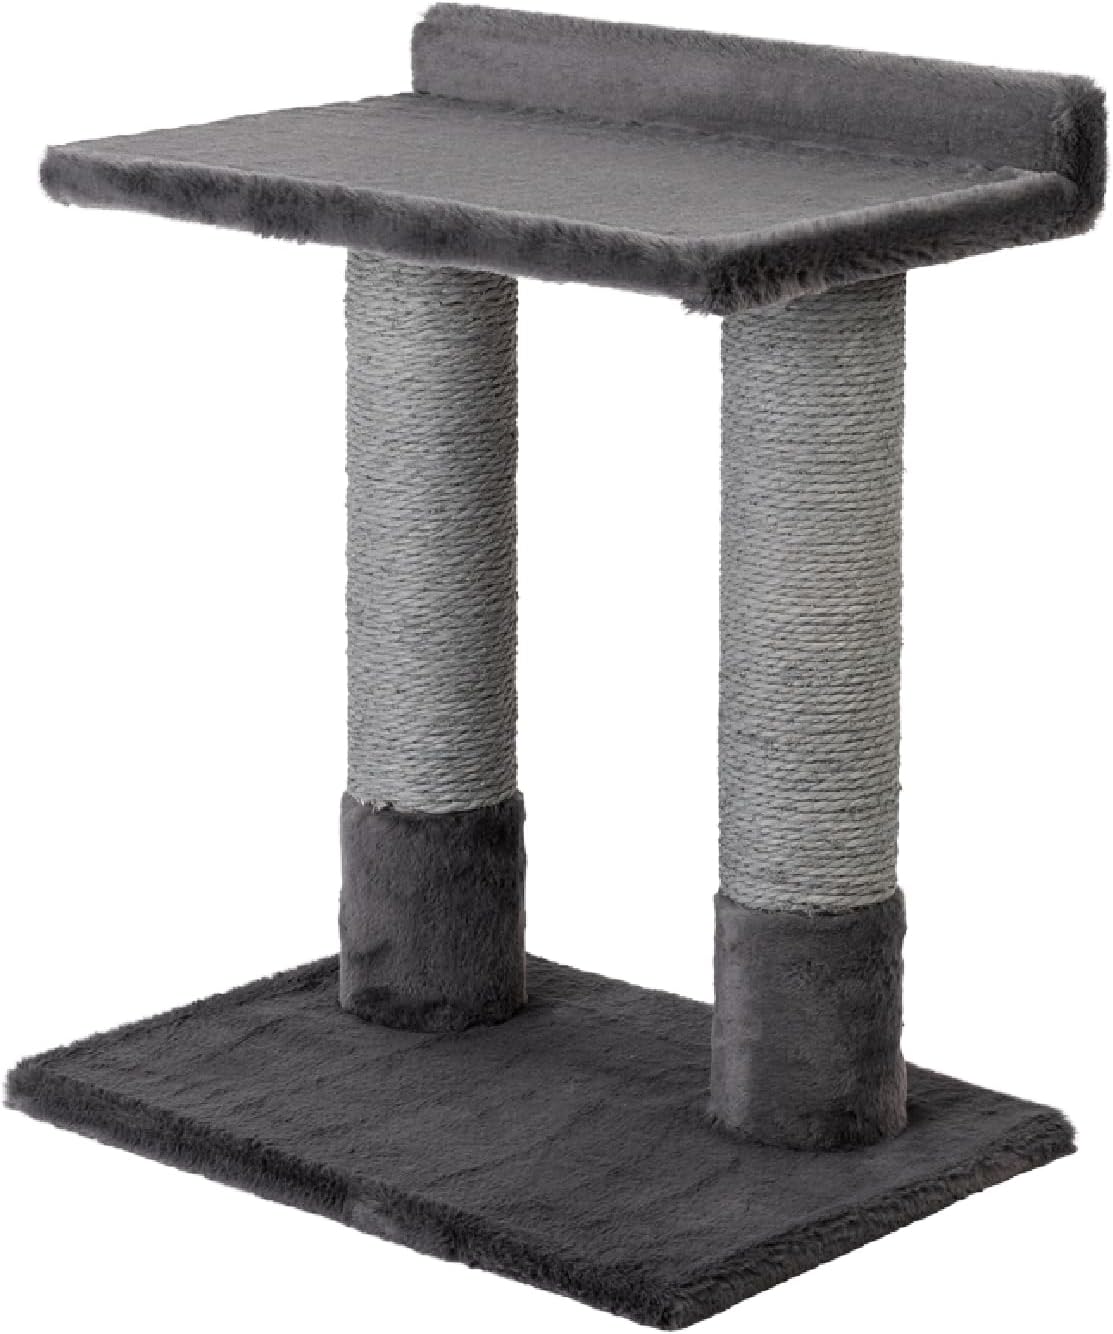 24 Inch Classic Comfort for Indoor Modern Premium Cats and Kittens Scratcher Larger Base for Better Stability, Grey